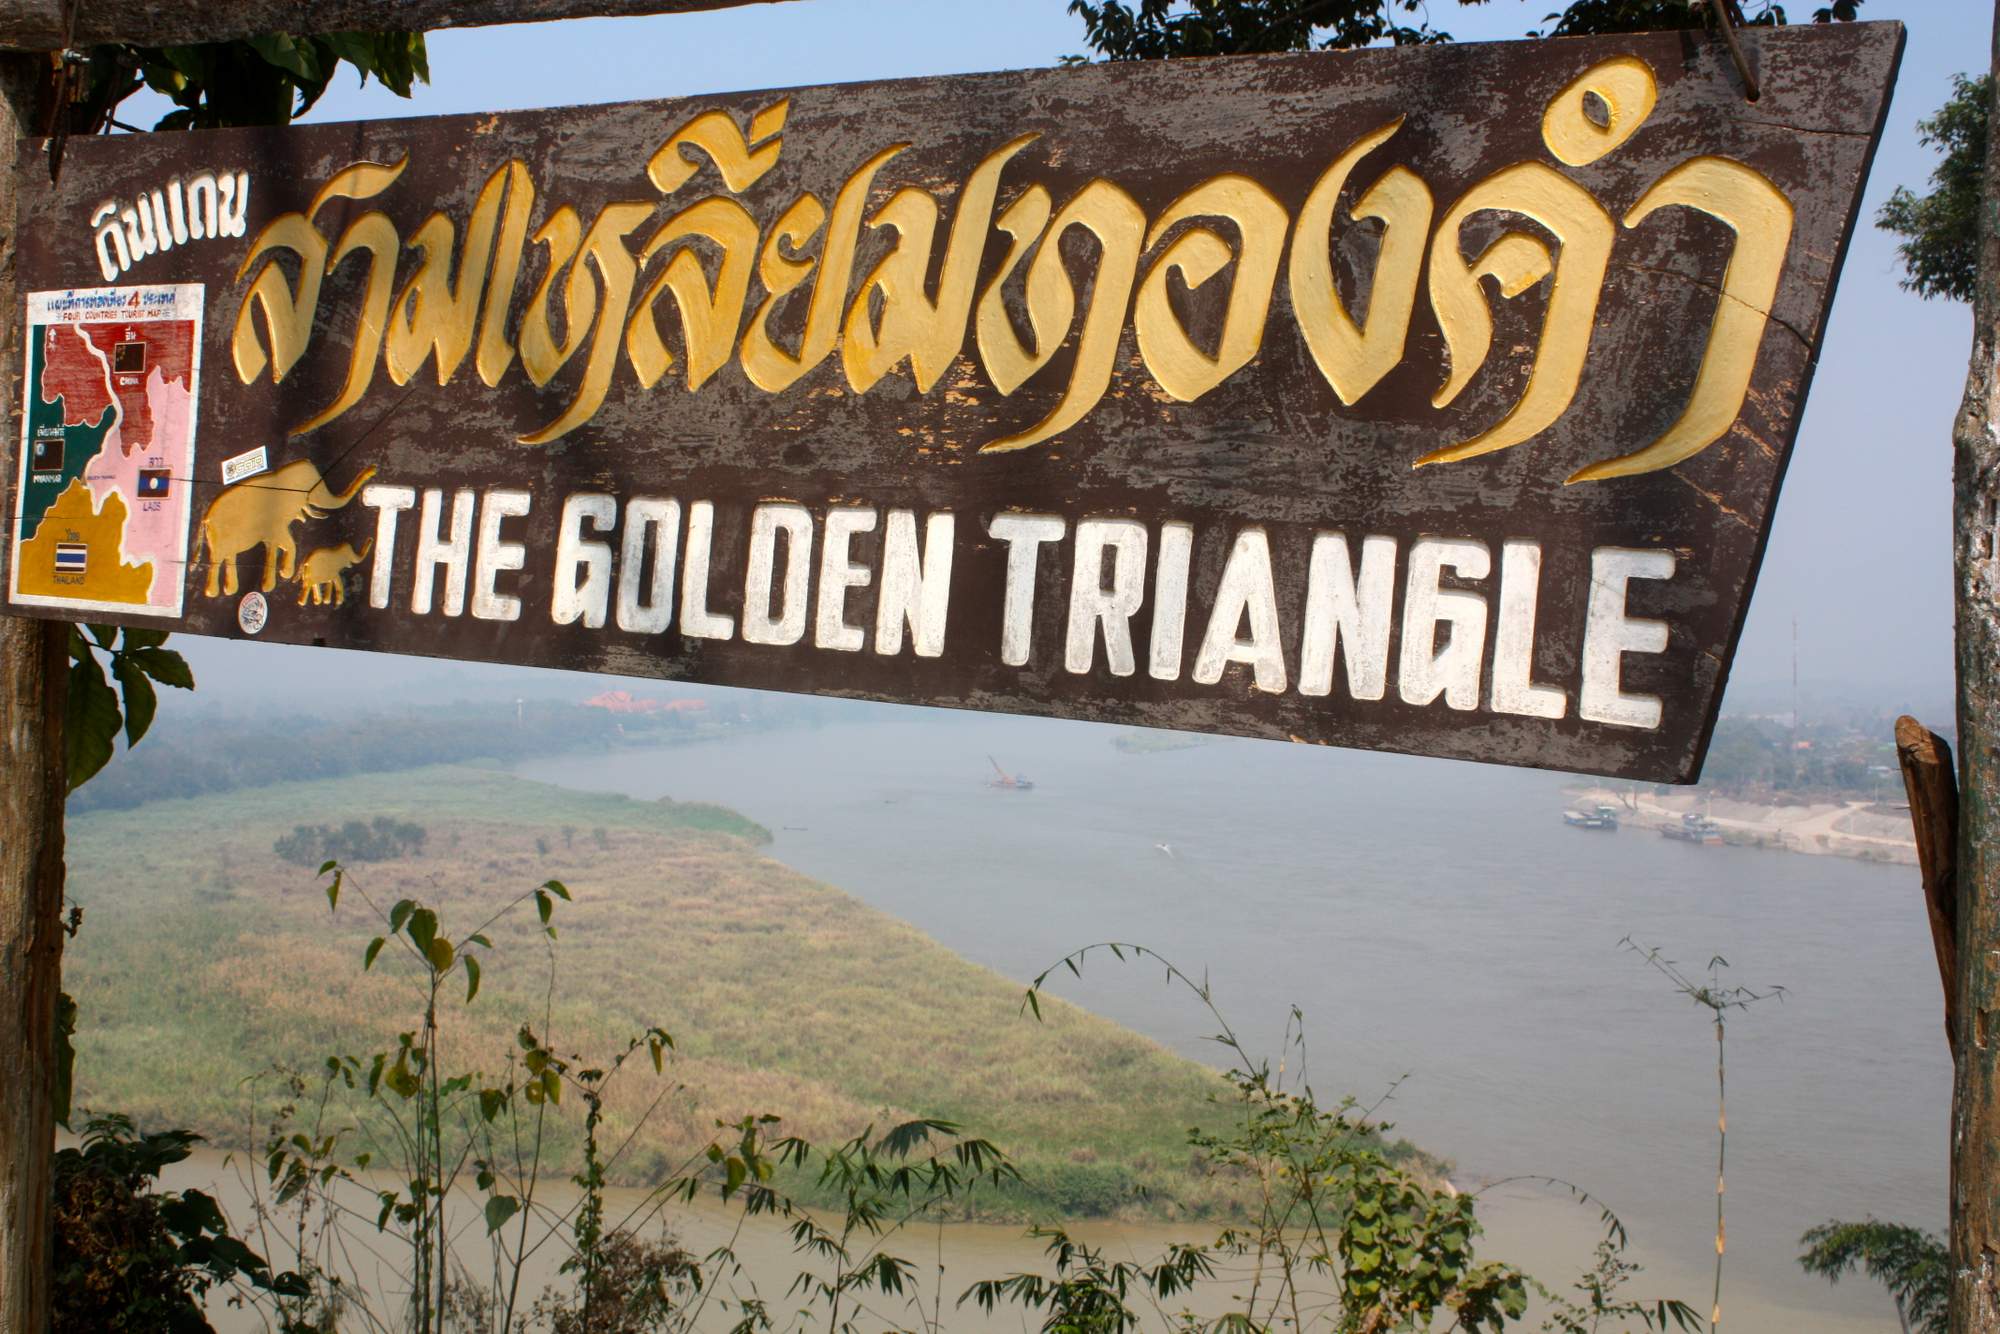 Cycling to the Golden Triangle, Thailand